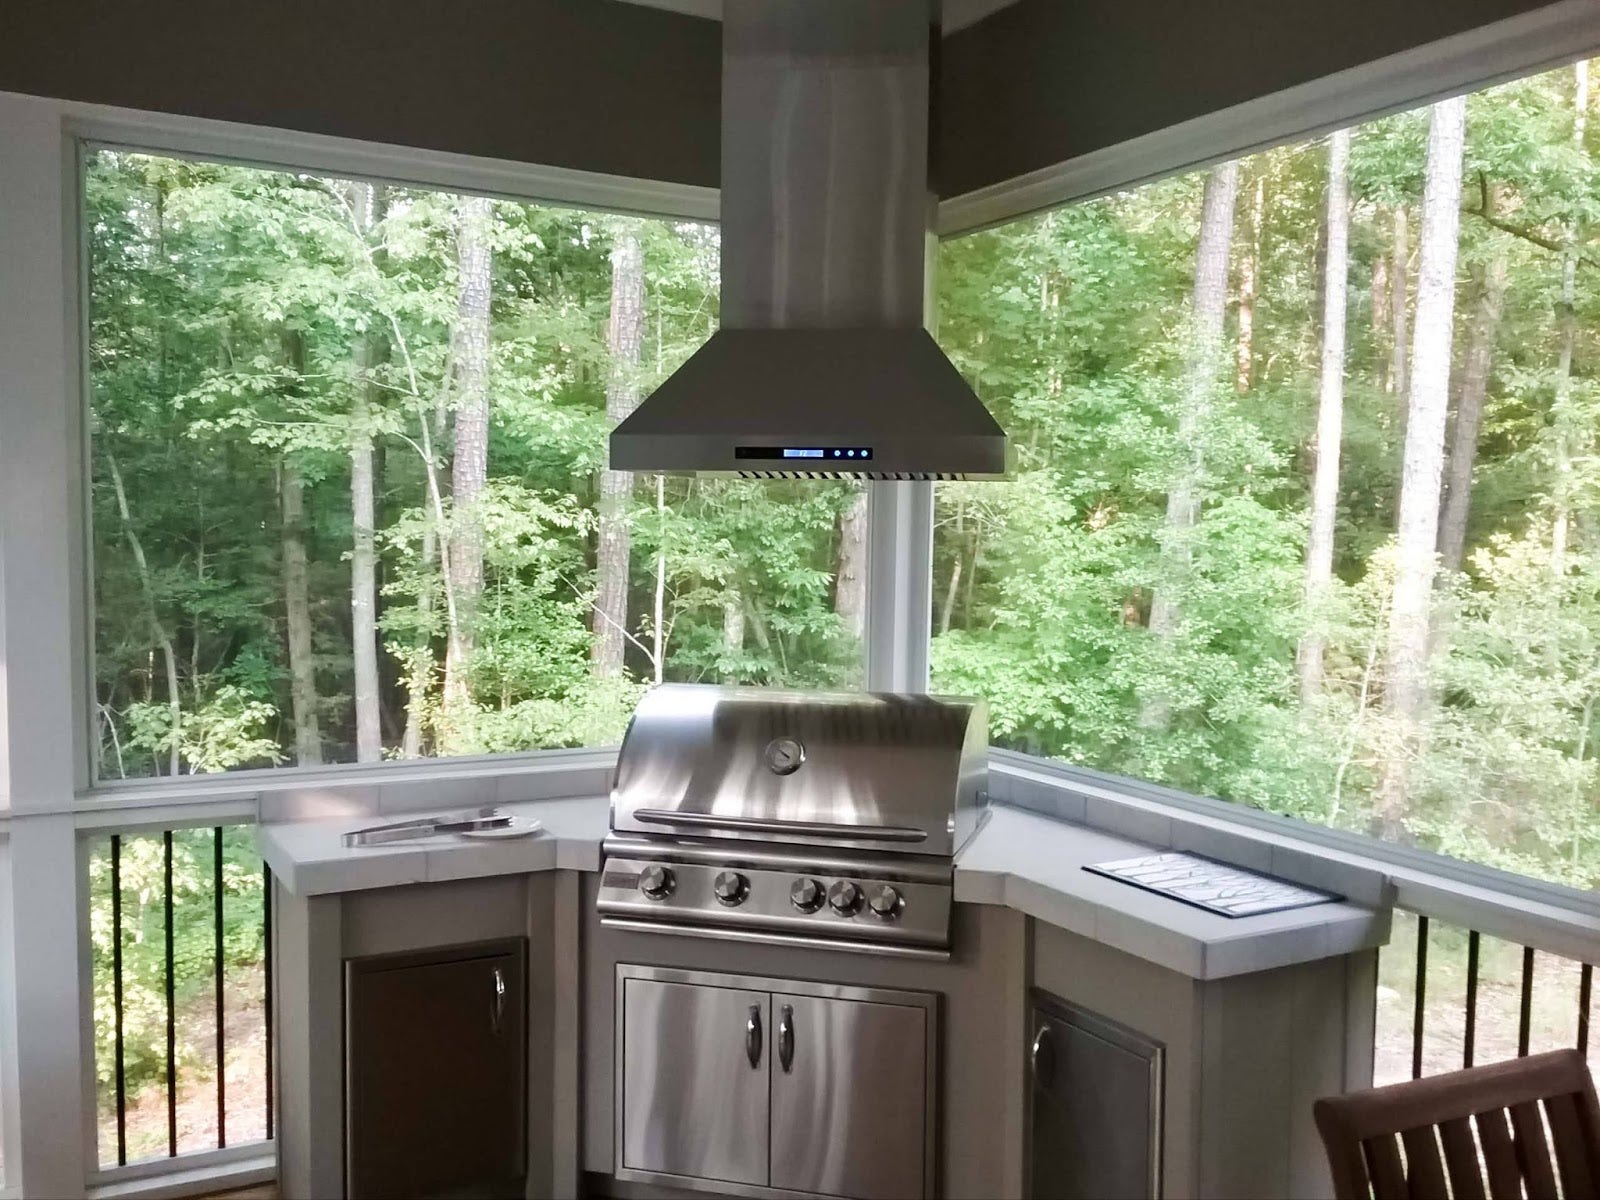 Forest-view kitchen on an enclosed patio featuring a high-end barbecue grill and sleek vent hood, perfect for nature-inspired dining.